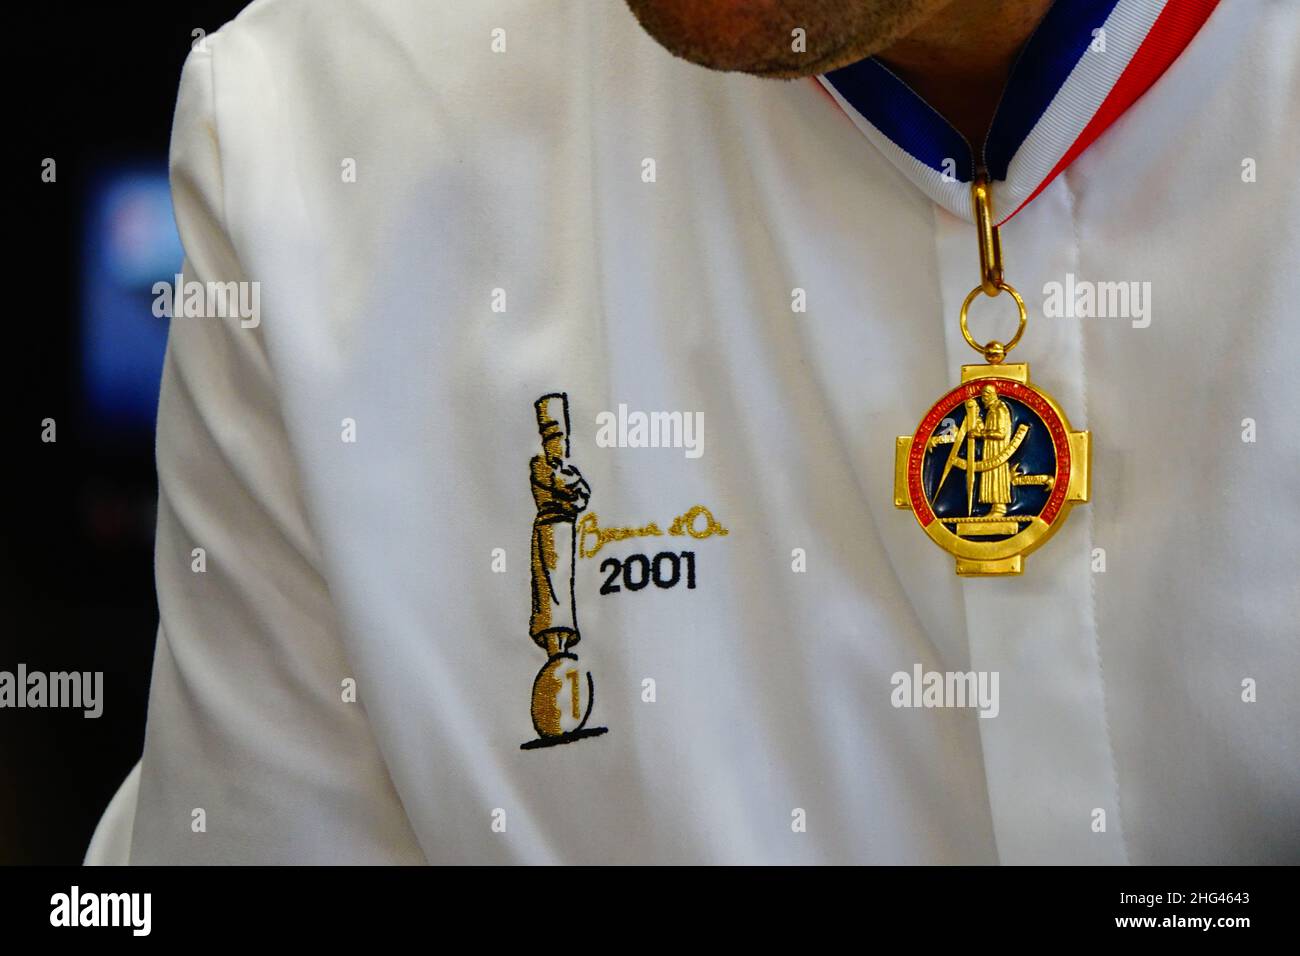 Close-up of the golden medal and uniform of a Paul Bocuse award winning chef, in Lyon, France Stock Photo